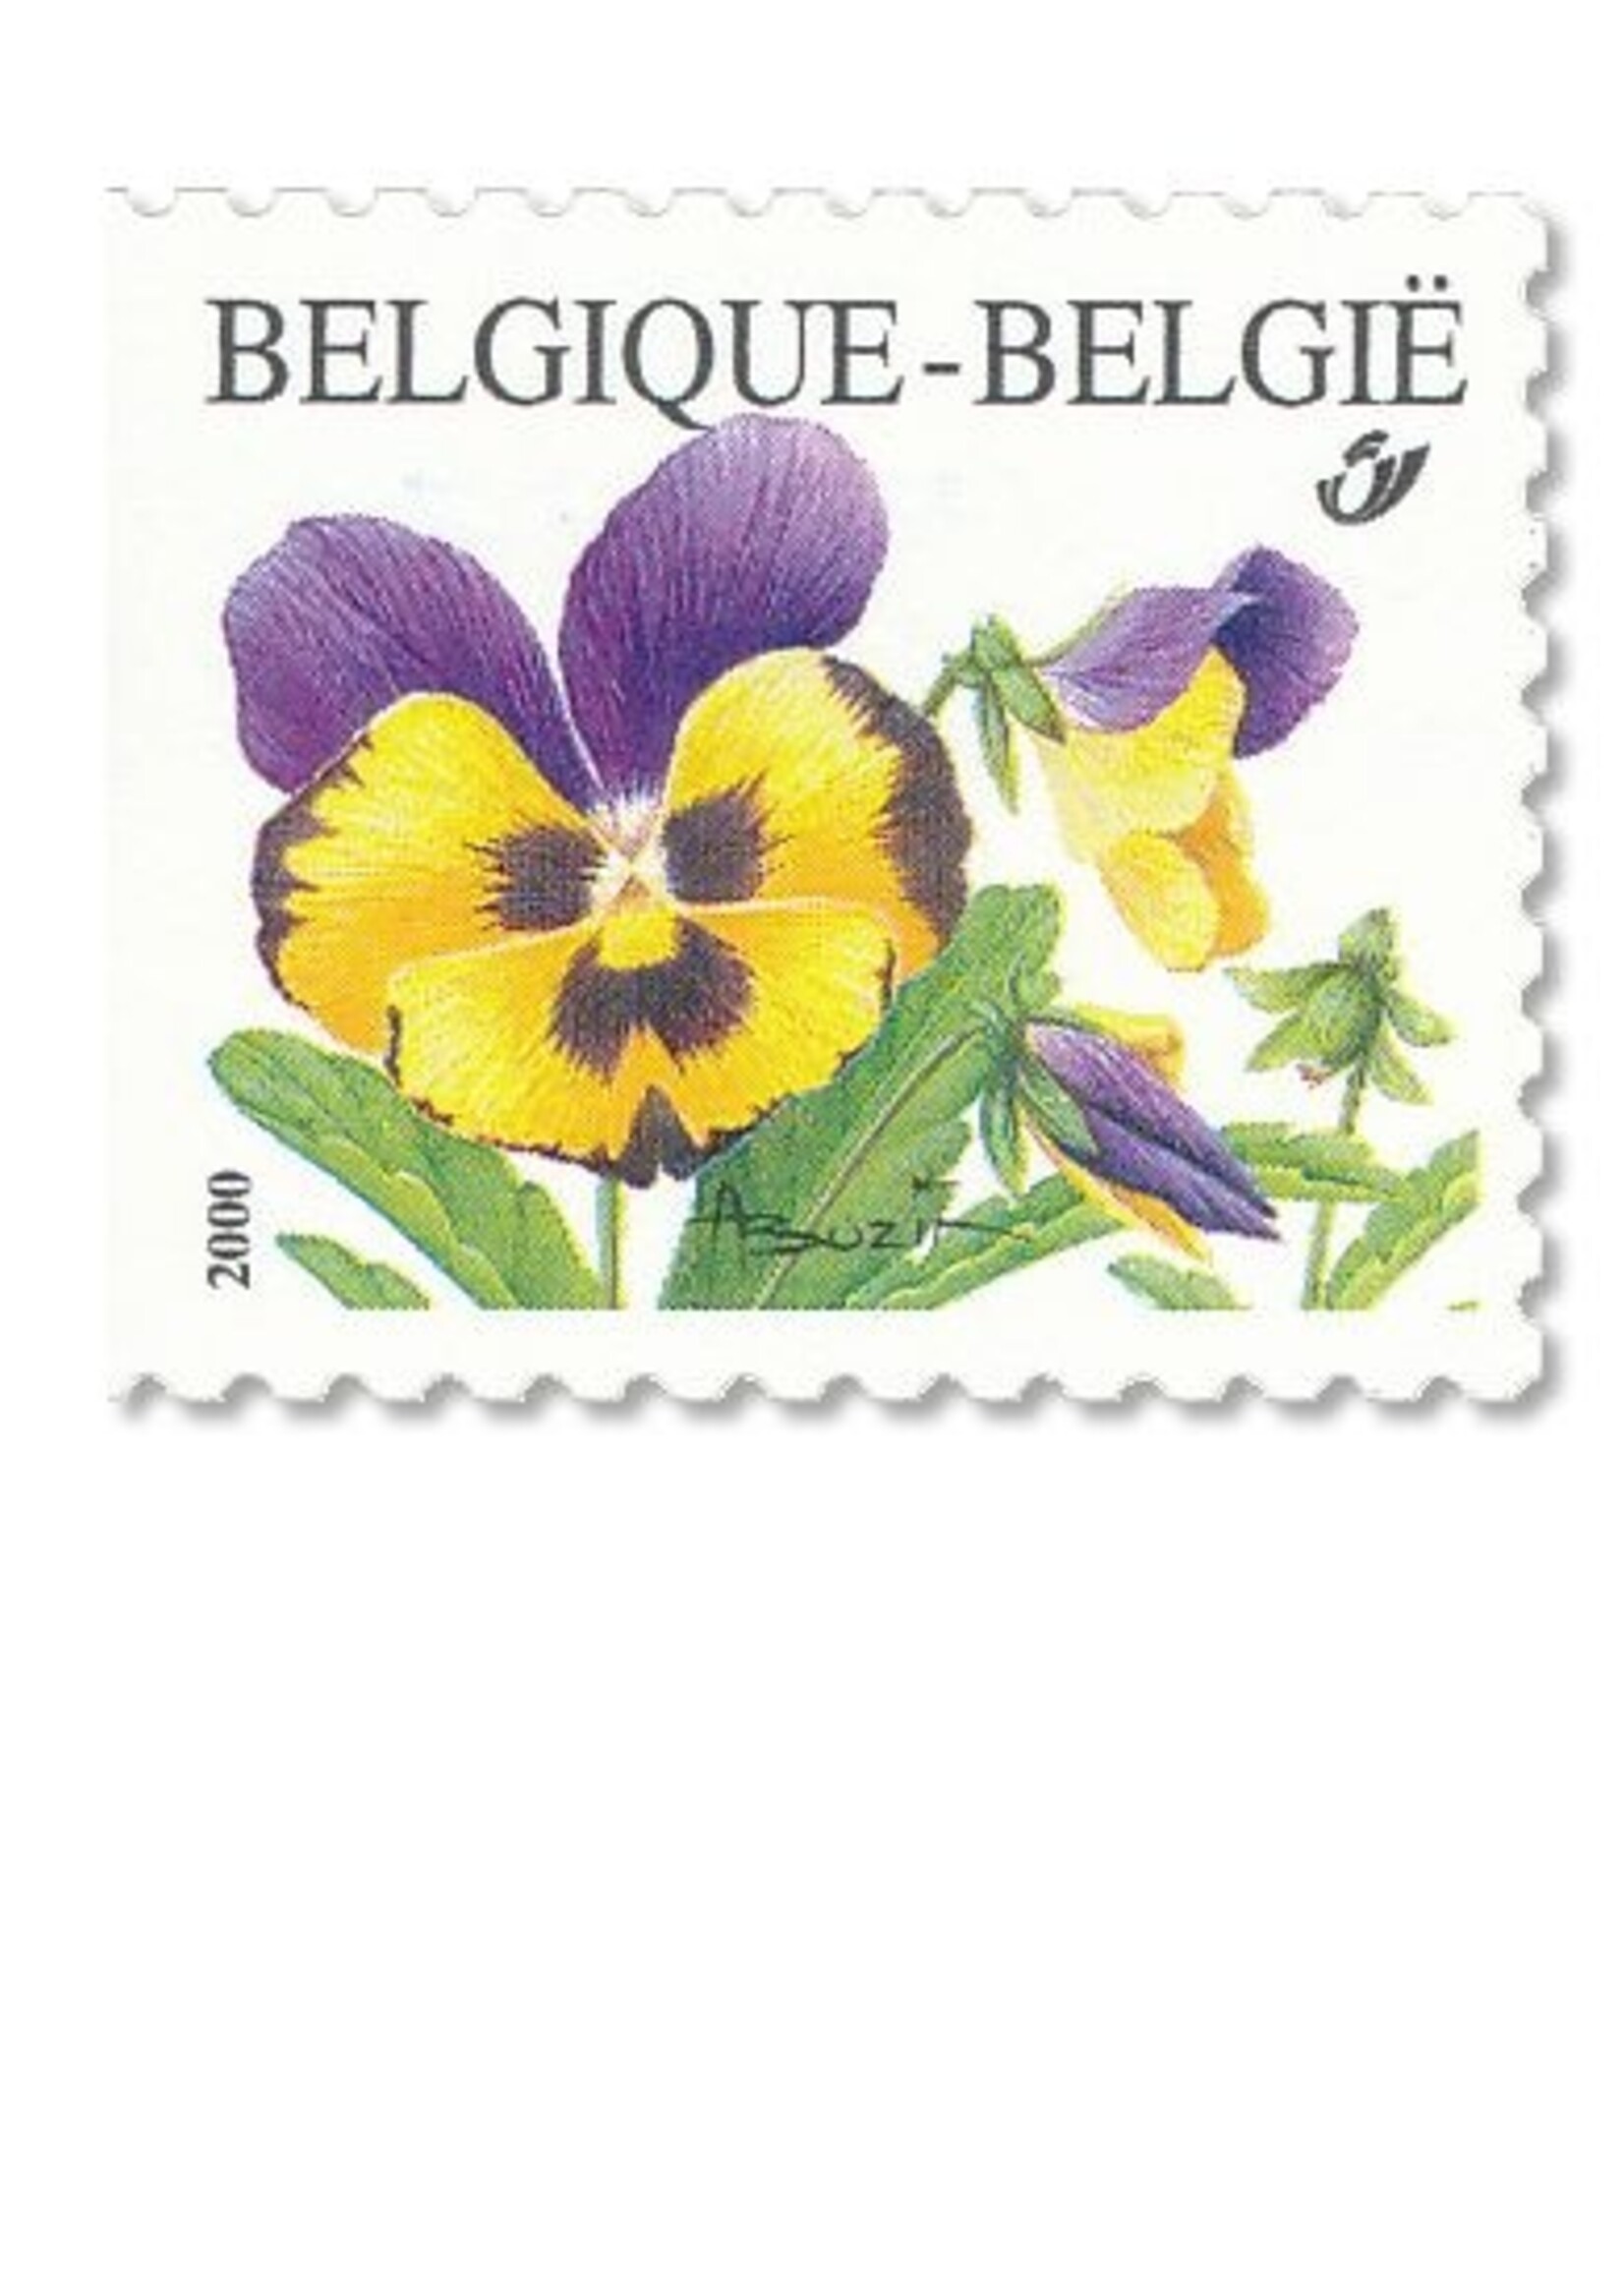 Theme Nature 2 - Booklet with 10 self-adhesive stamps - Rate 1, Belgium